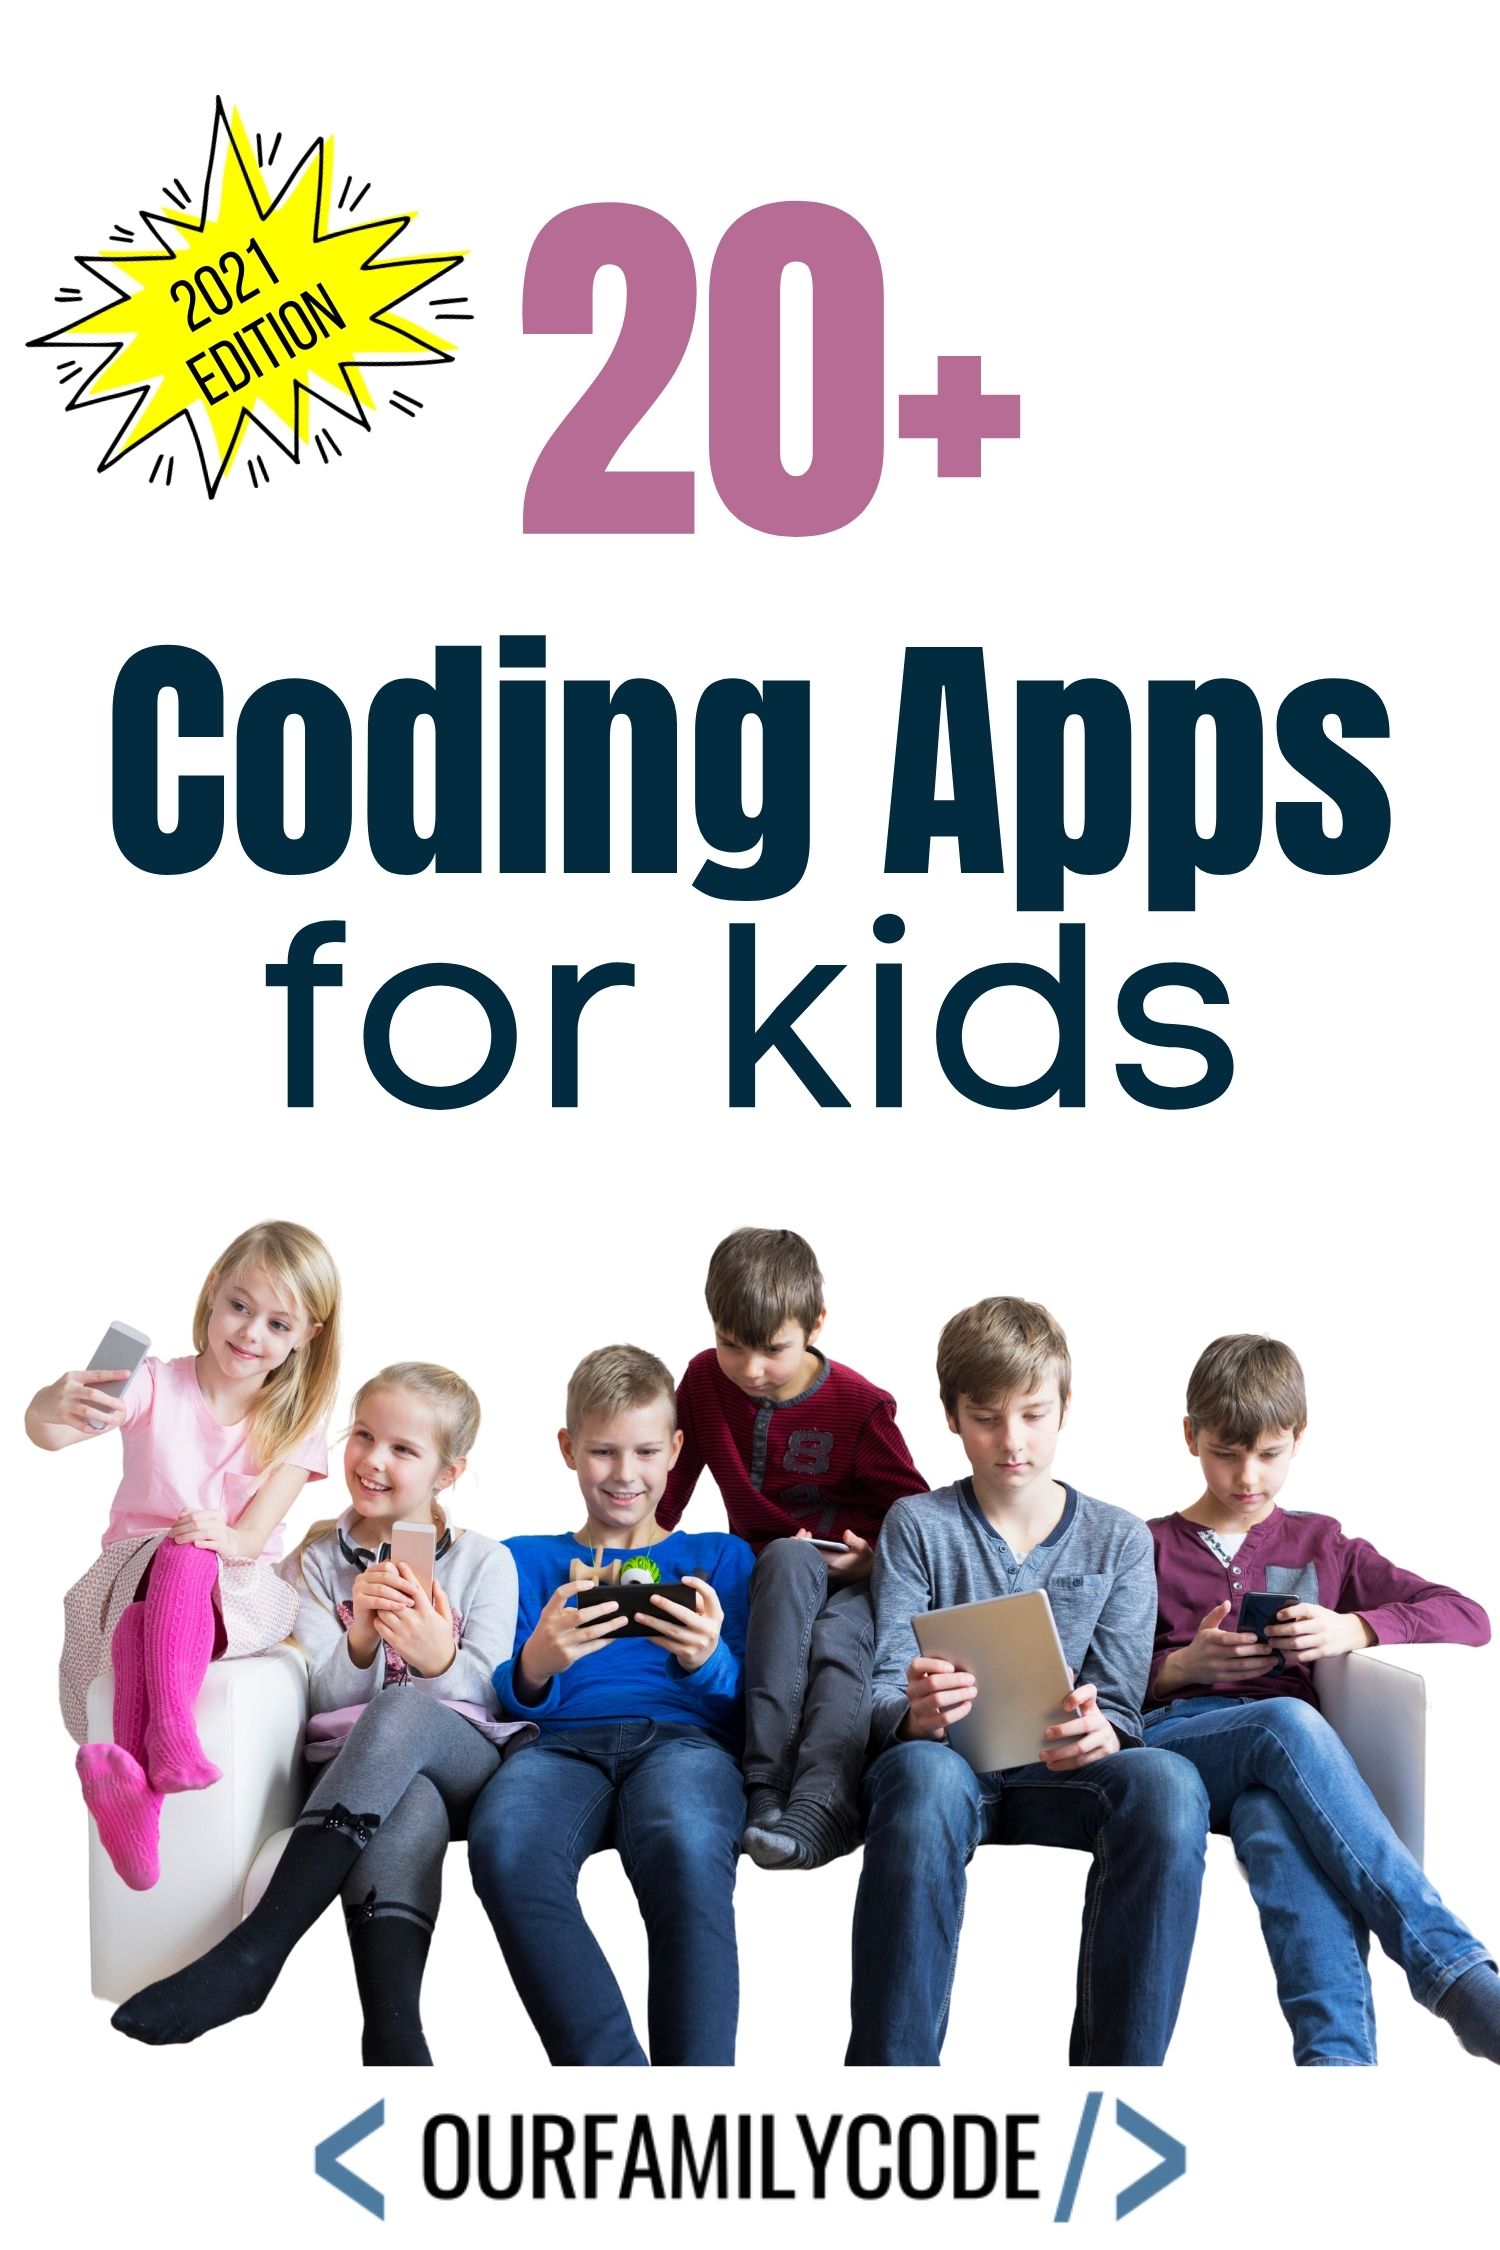 A picture of kids sitting on a couch playing devices with 20+ coding apps in text above.